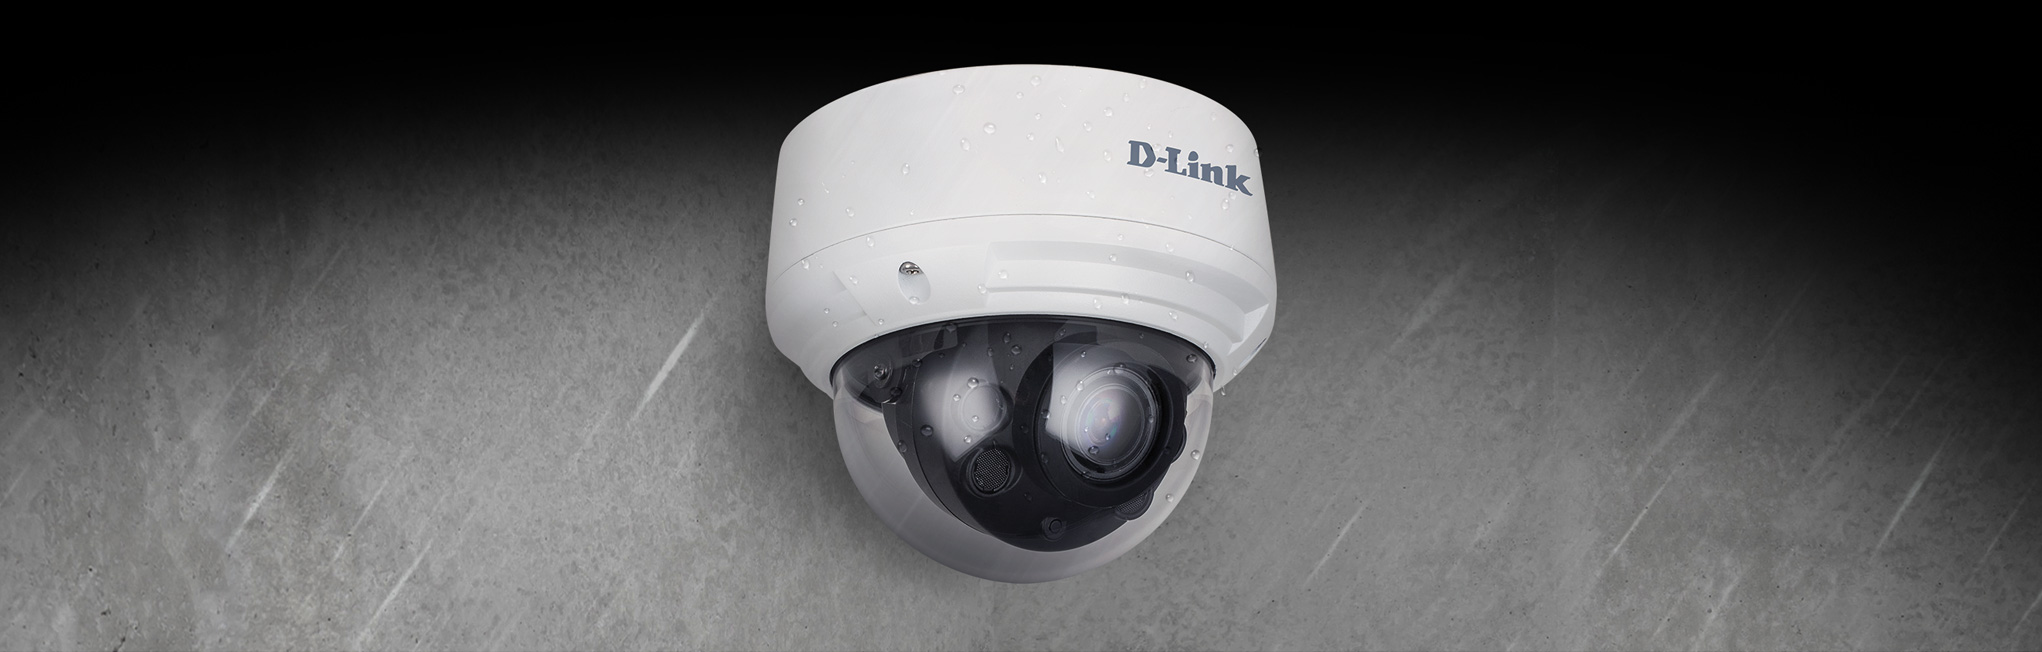 DCS-4618EK 8 Megapixel H.265 Outdoor Dome Camera - mounted outside in the rain.